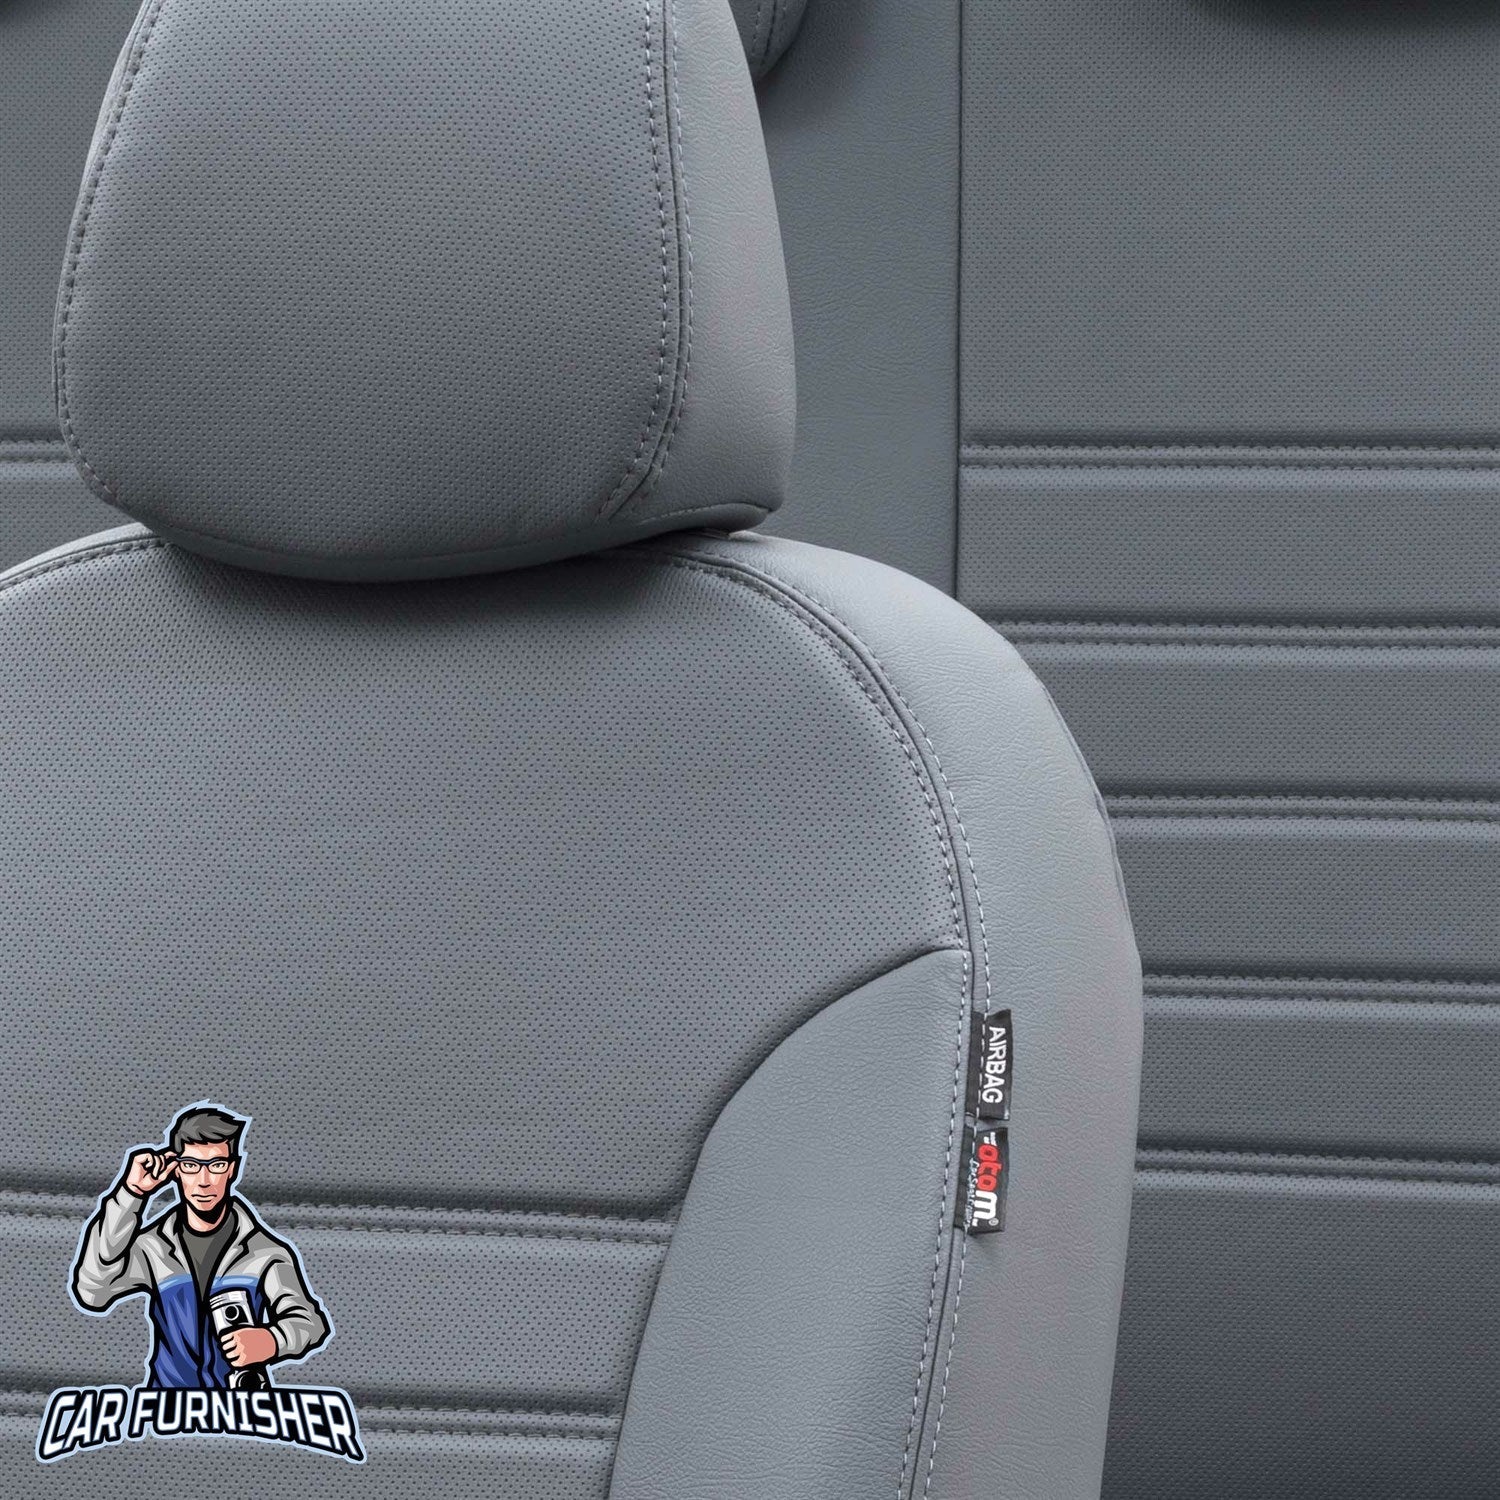 Peugeot Boxer Seat Covers Istanbul Leather Design Smoked Leather